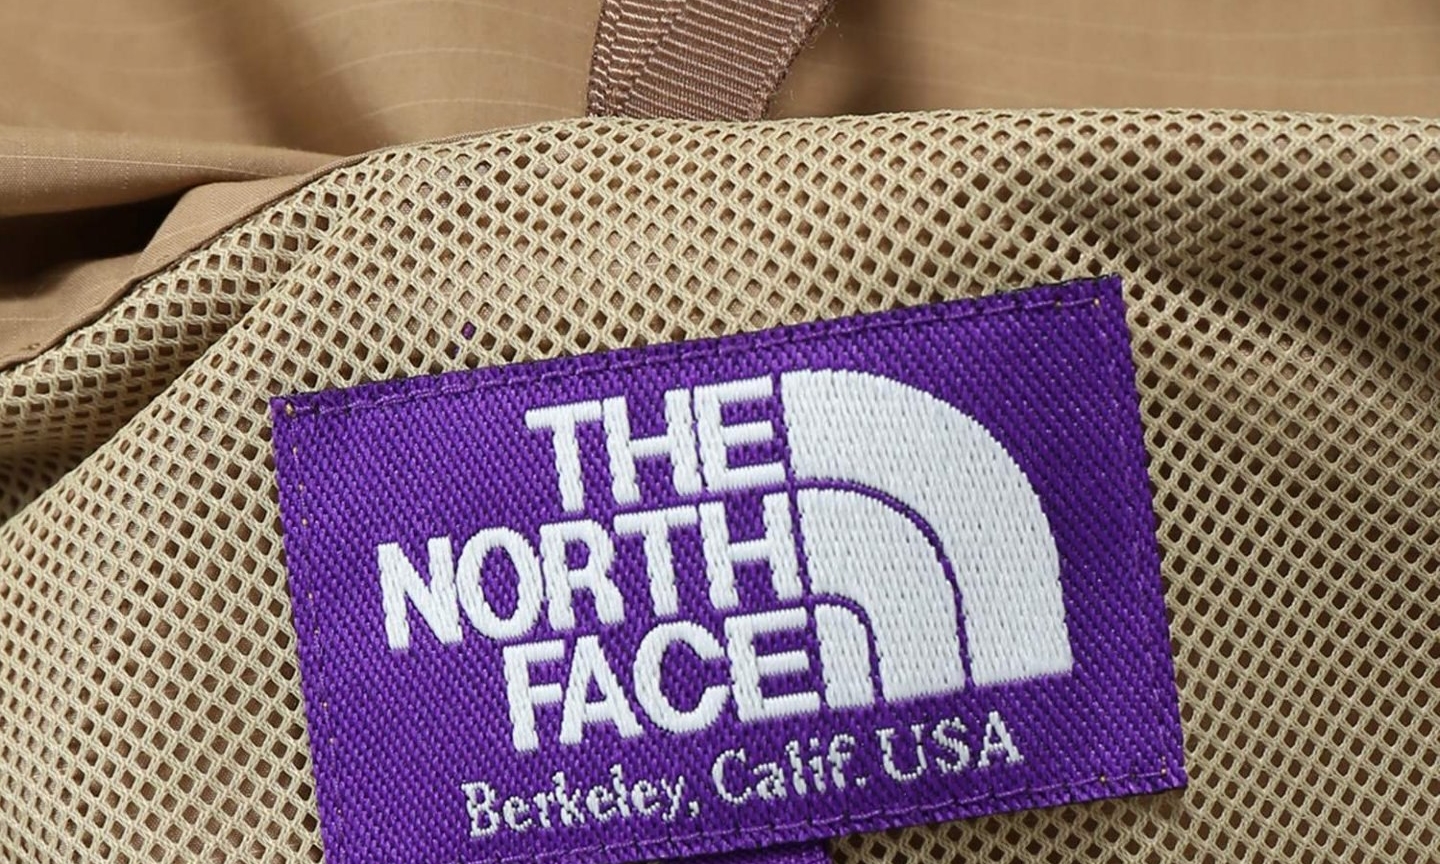 The North Face Purple Label creates an exclusive capsule for 